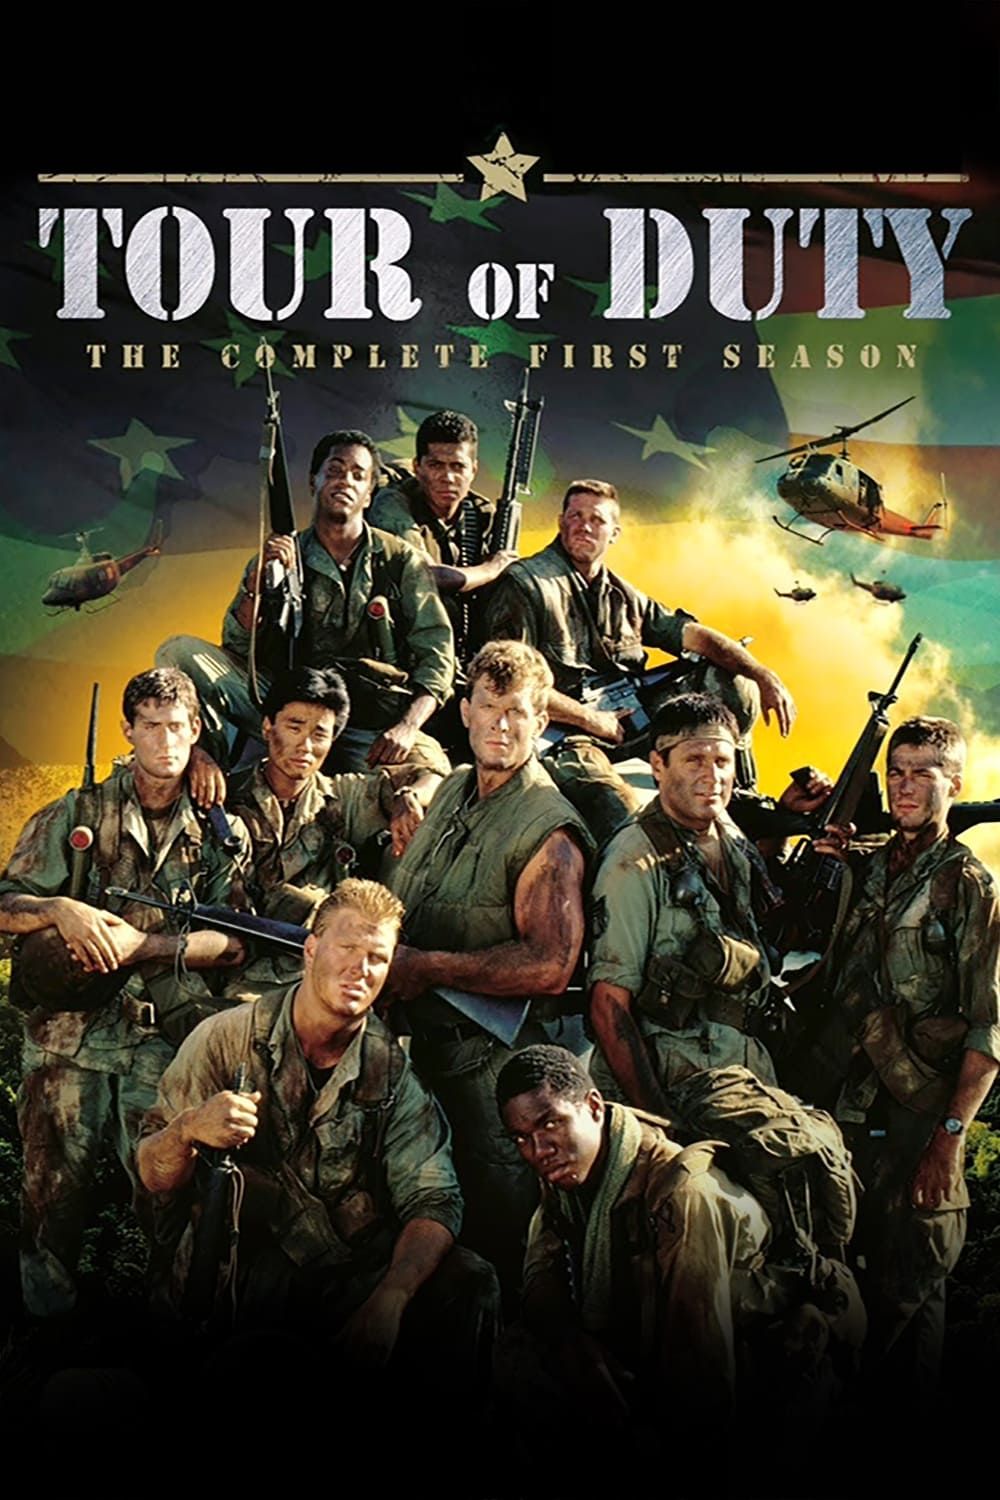 tour of duty ep 1